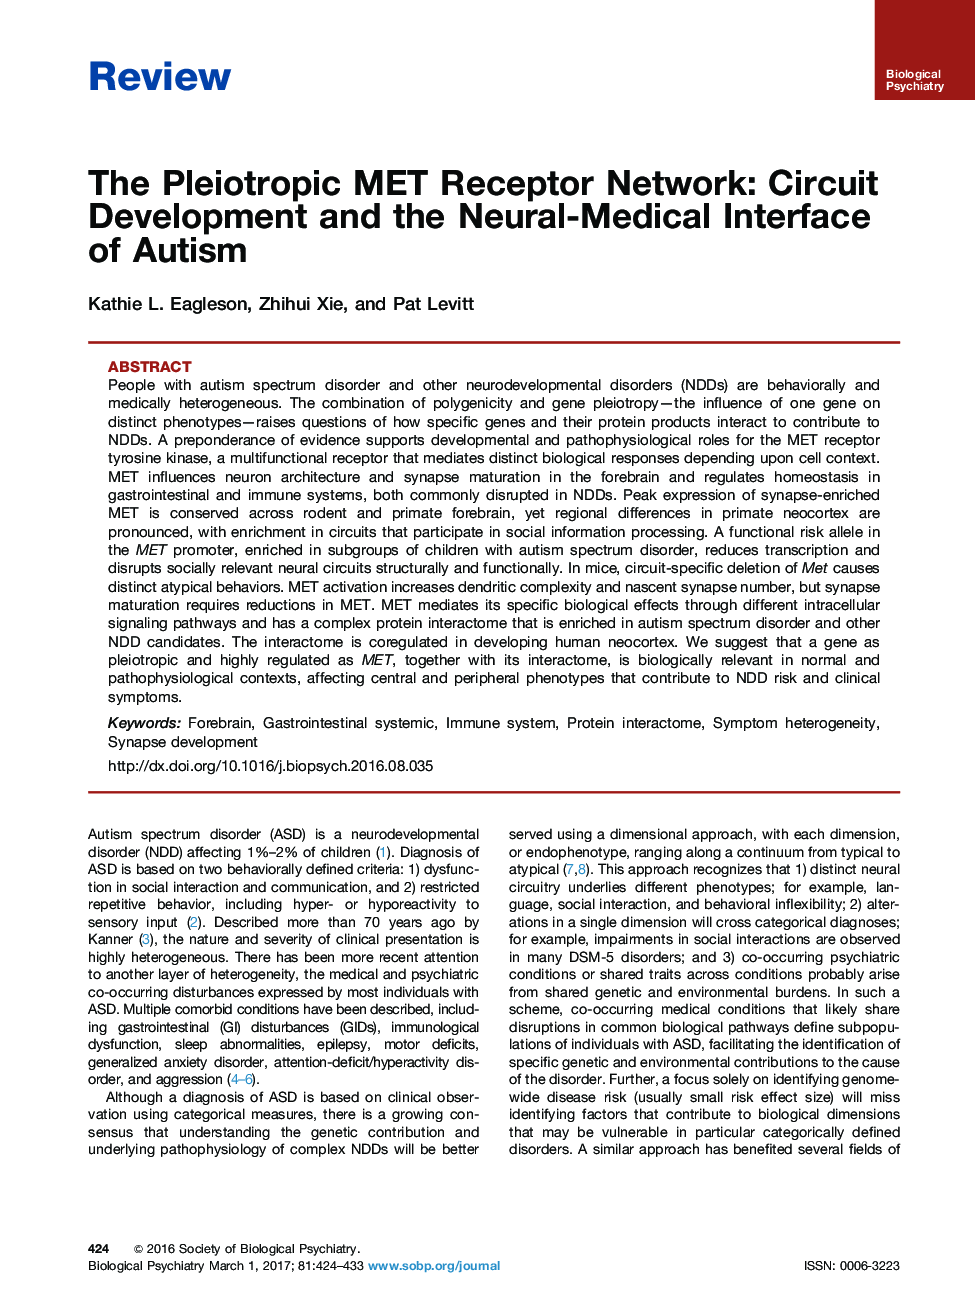 ReviewThe Pleiotropic MET Receptor Network: Circuit Development and the Neural-Medical Interface of Autism